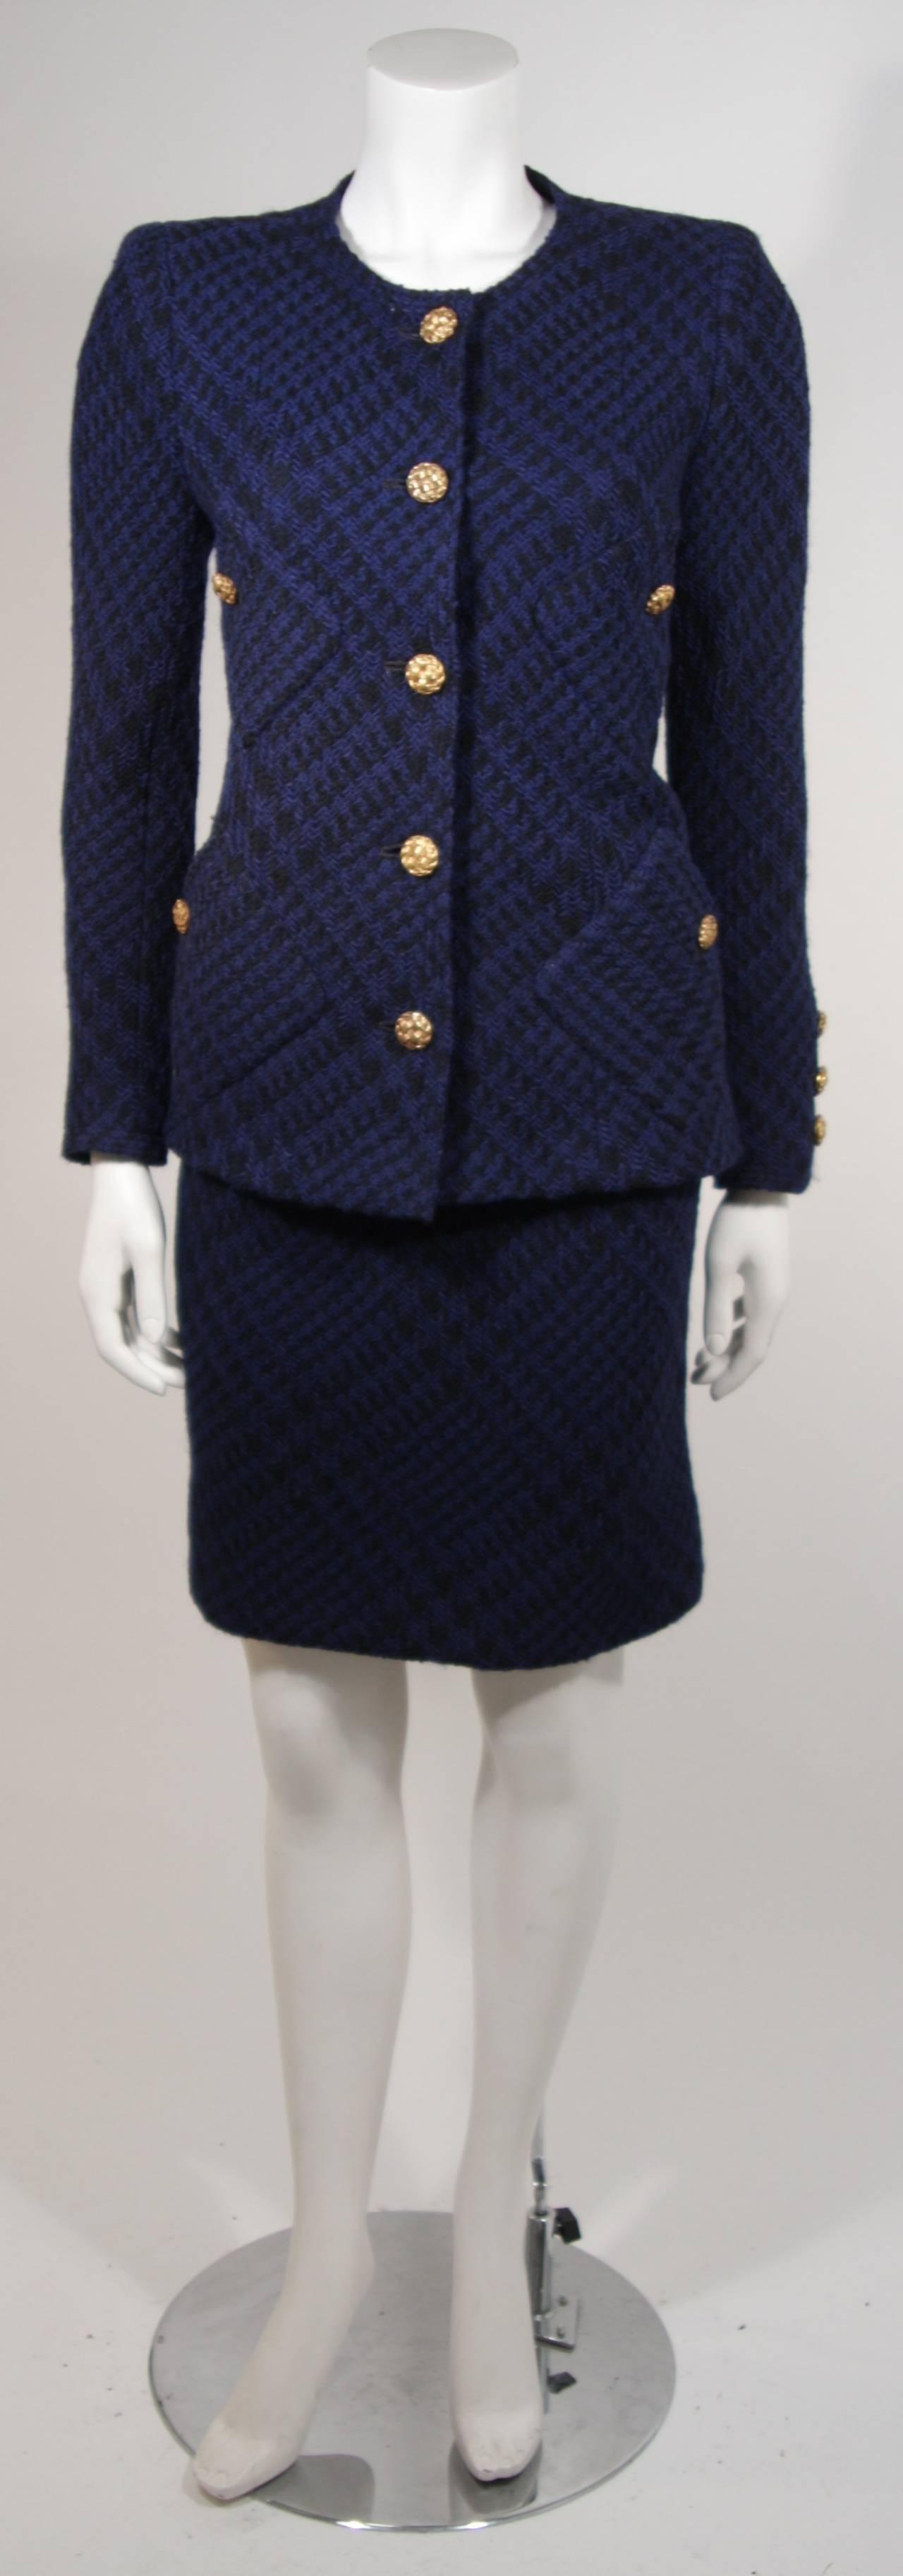 This Chanel suit is available for viewing at our Beverly Hills Boutique. The suit is a two piece ensemble which features a jacket and skirt. It is composed of a blue and black patterned tweed and lined with silk. The jacket features five center